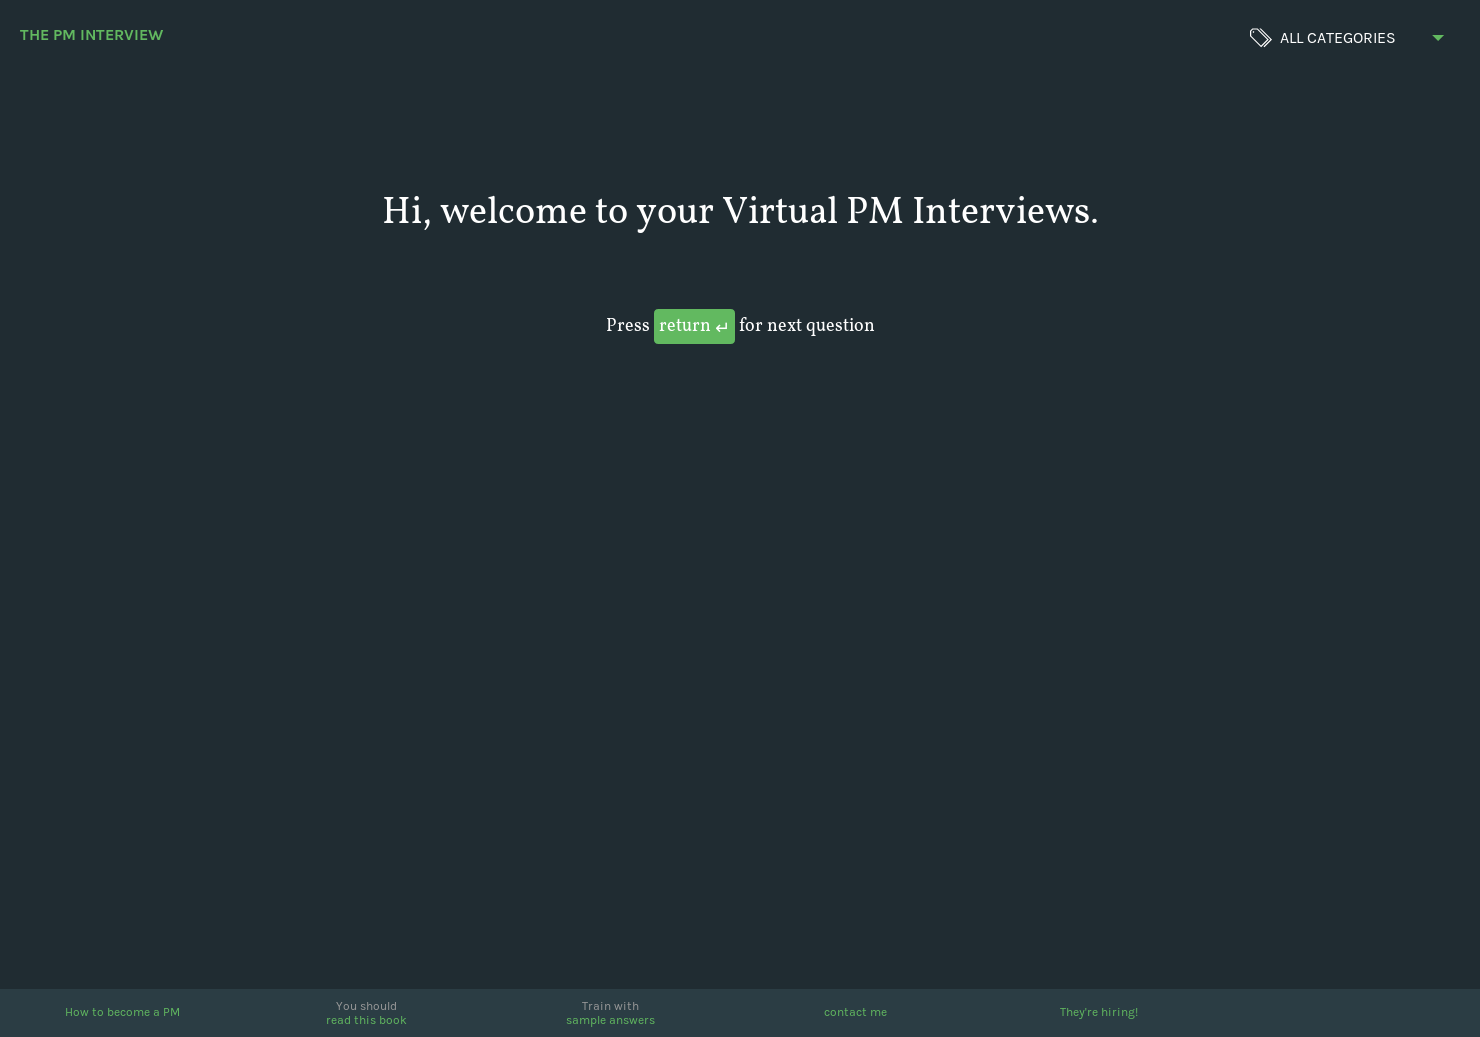 The PM Interview